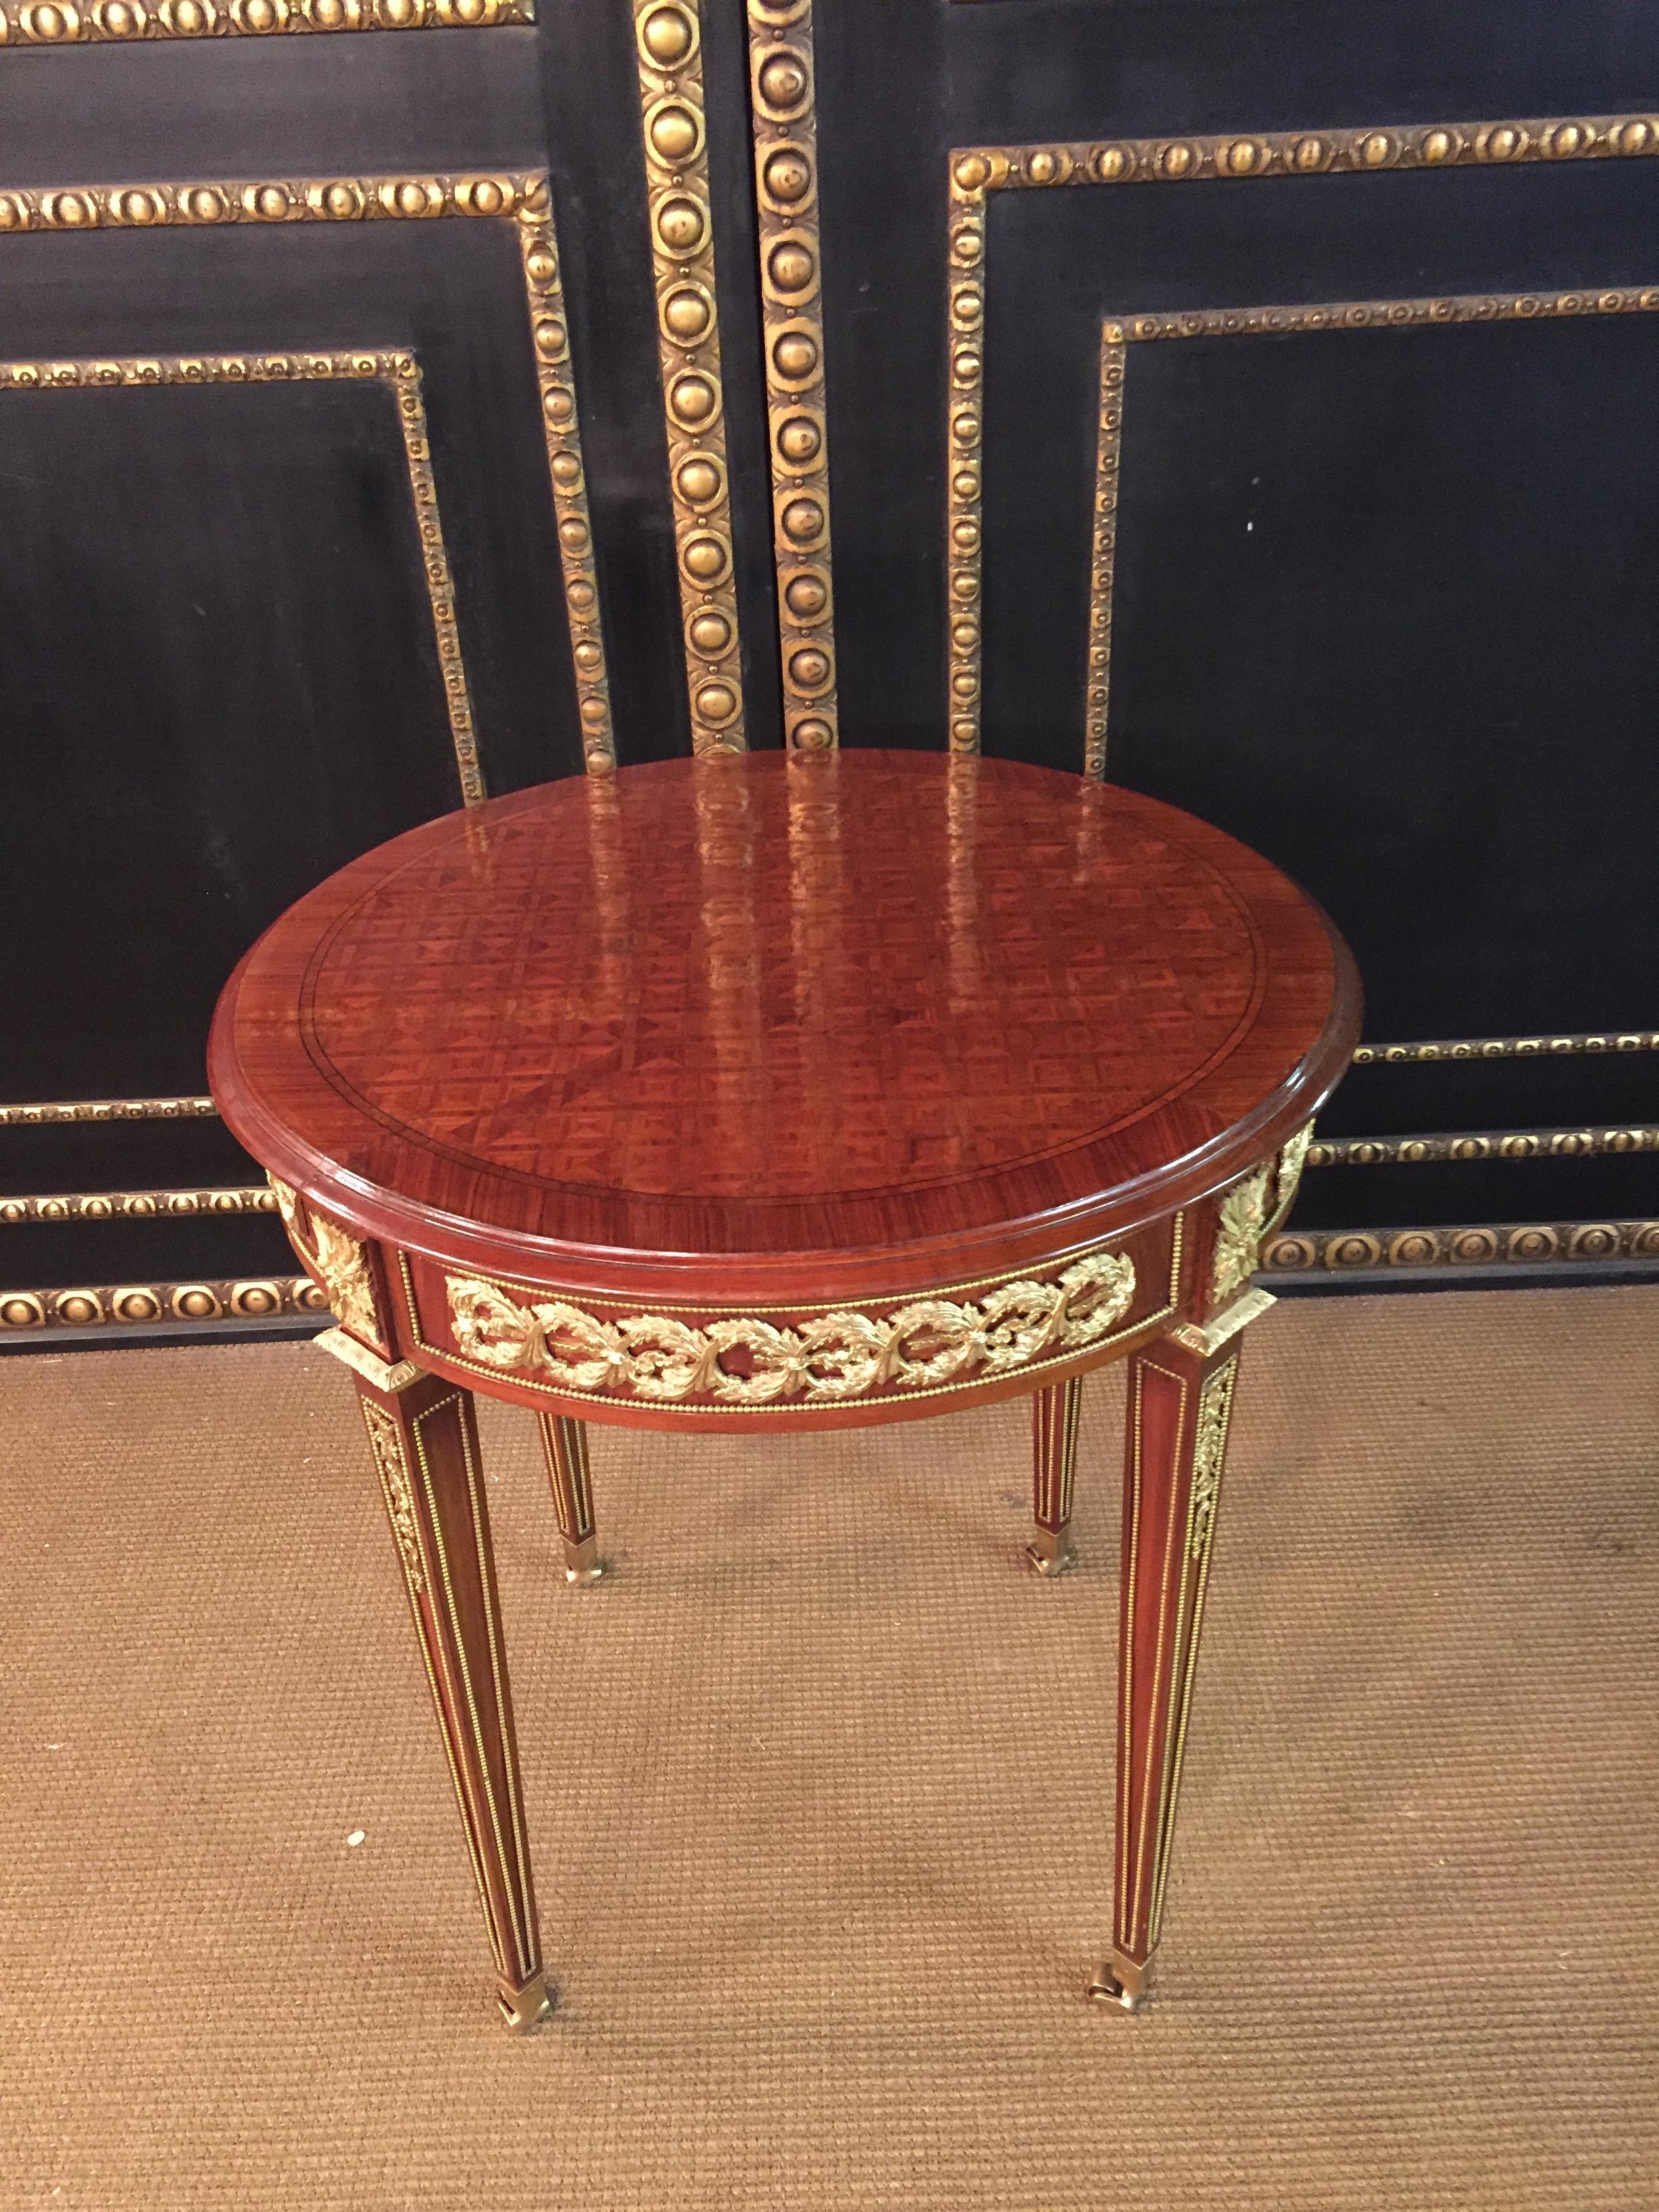 Veneer 20th Century Louis XVI Style with Round Platte with Inlays French Table